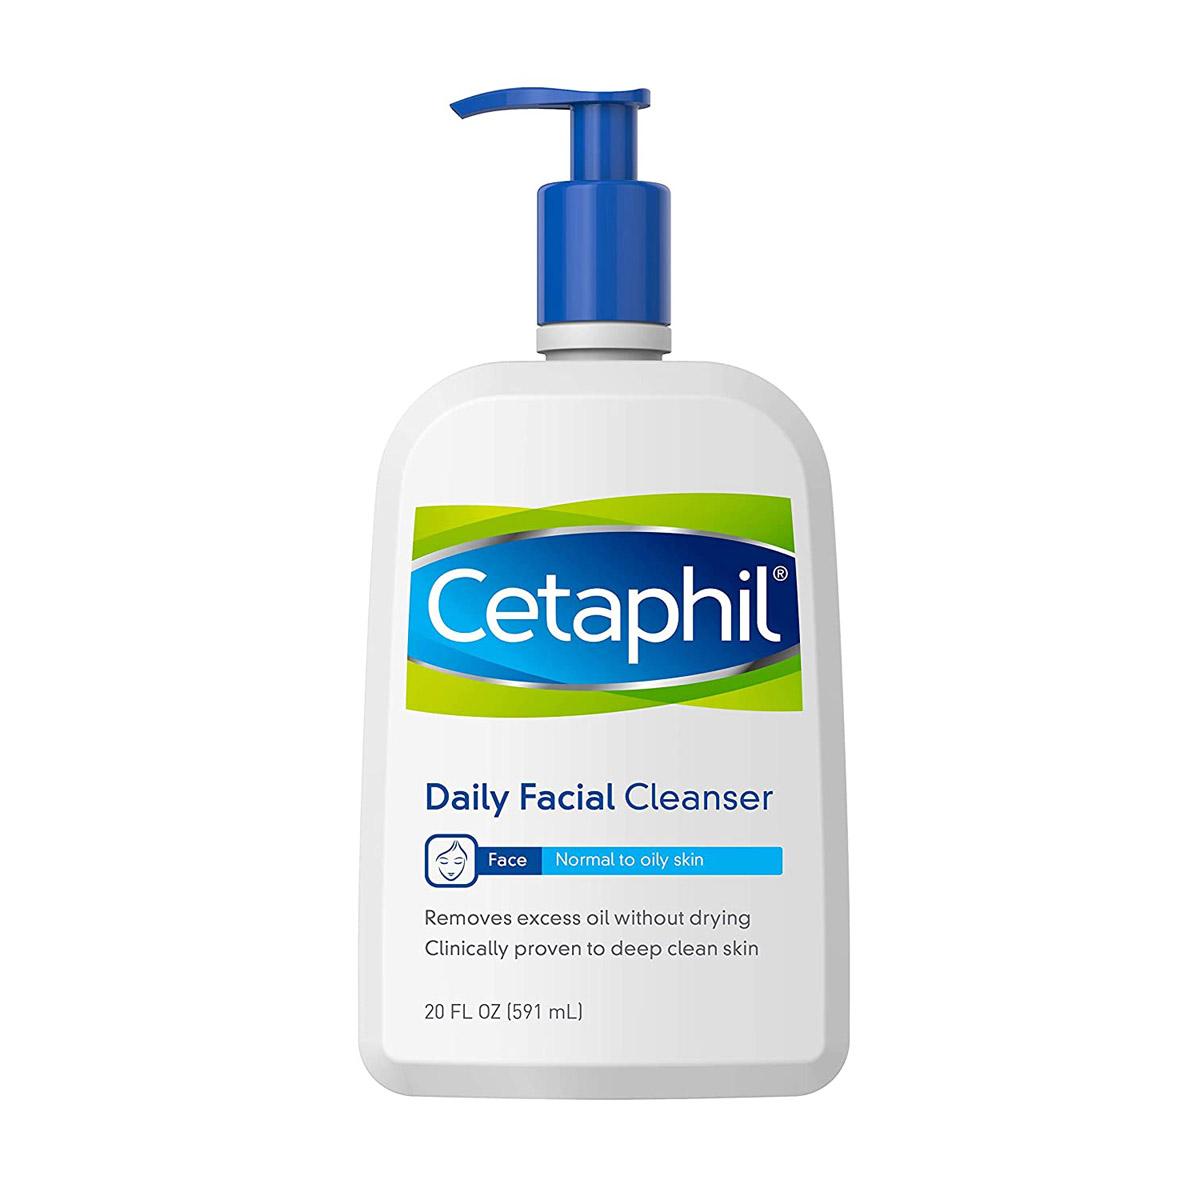 20Oz Cetaphil Daily Facial Cleanser for $5.22 Shipped